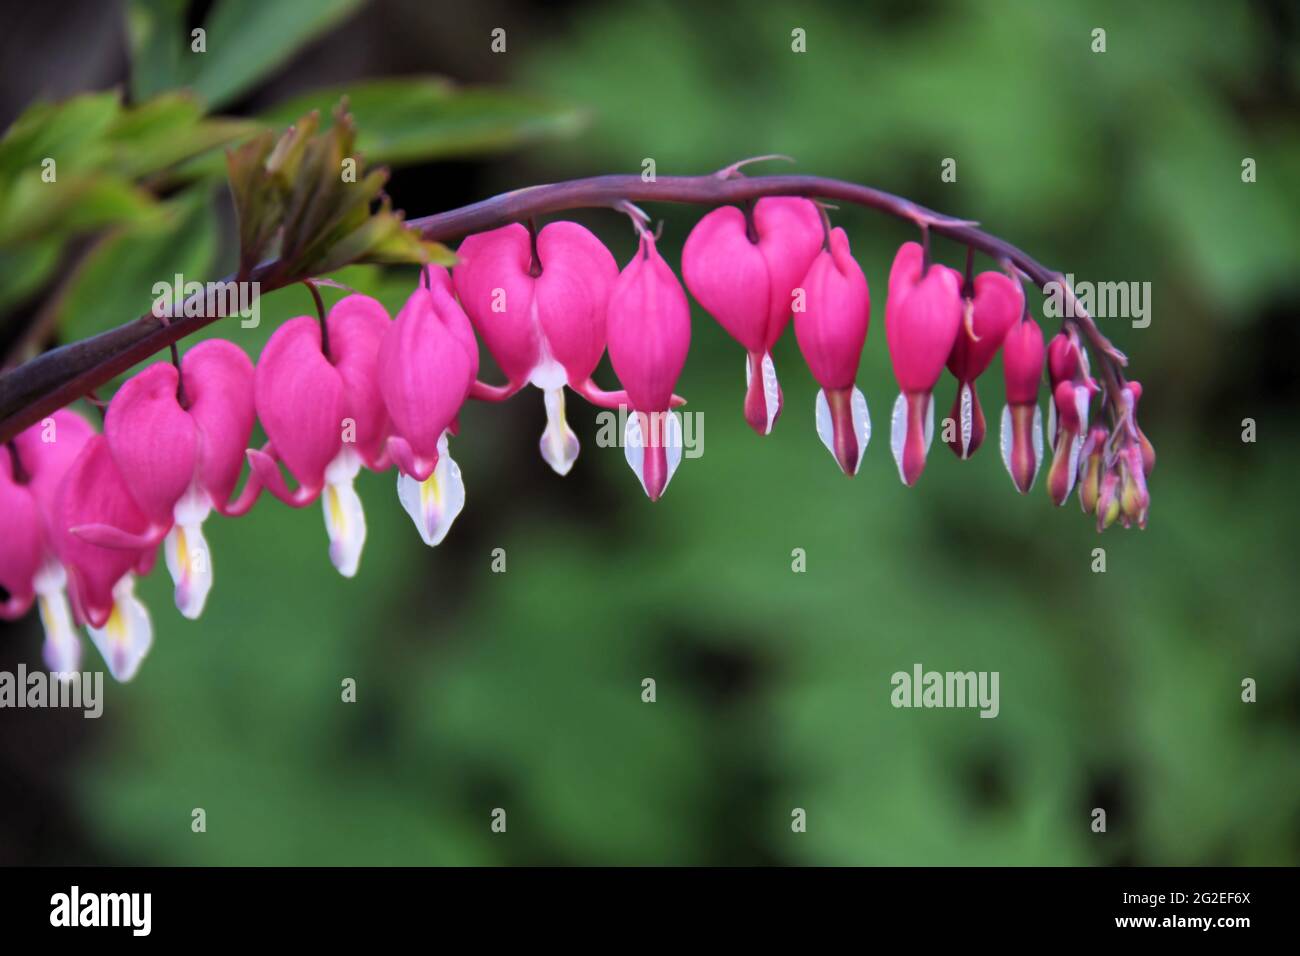 A beautiful stem of bleeding heart flowers against a blurred background of green leaves, in a homes garden, Stock Photo